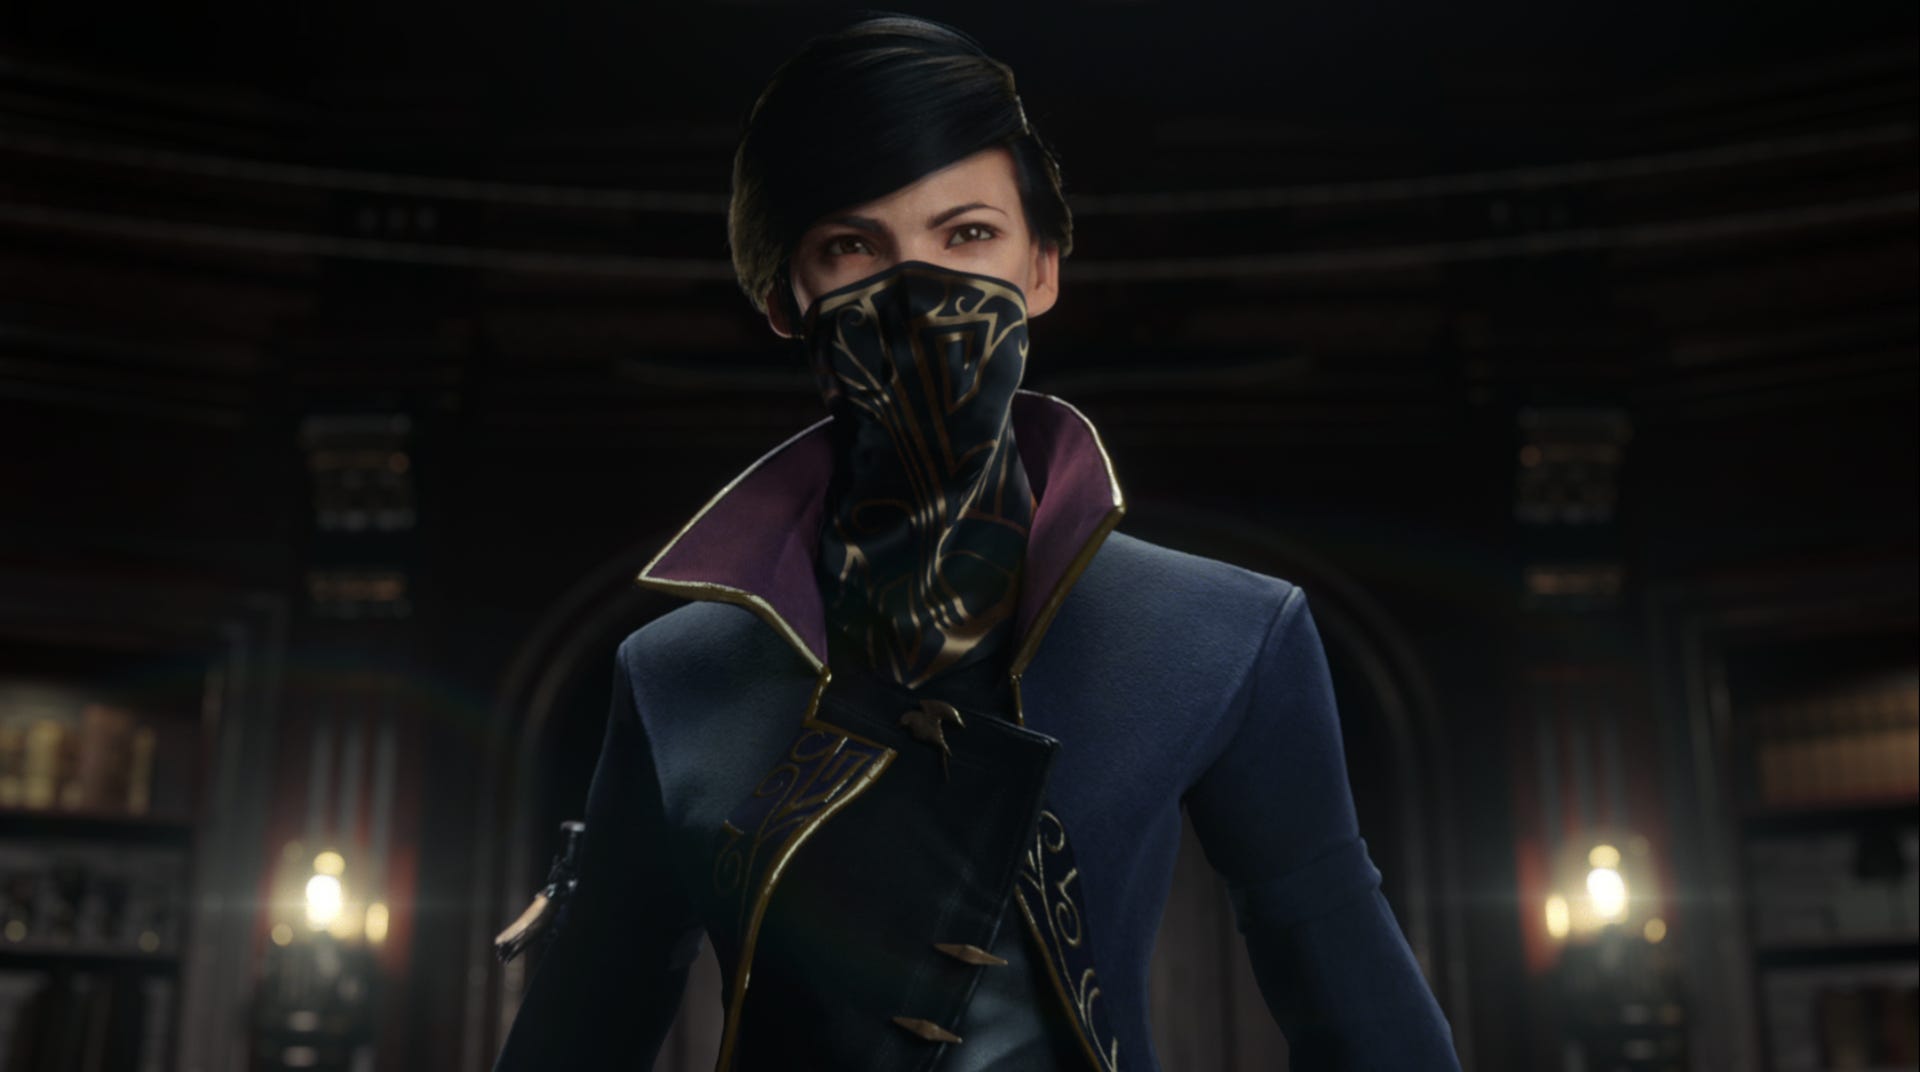 Dishonored 2: Release date, gameplay and everything you need to know - CNET